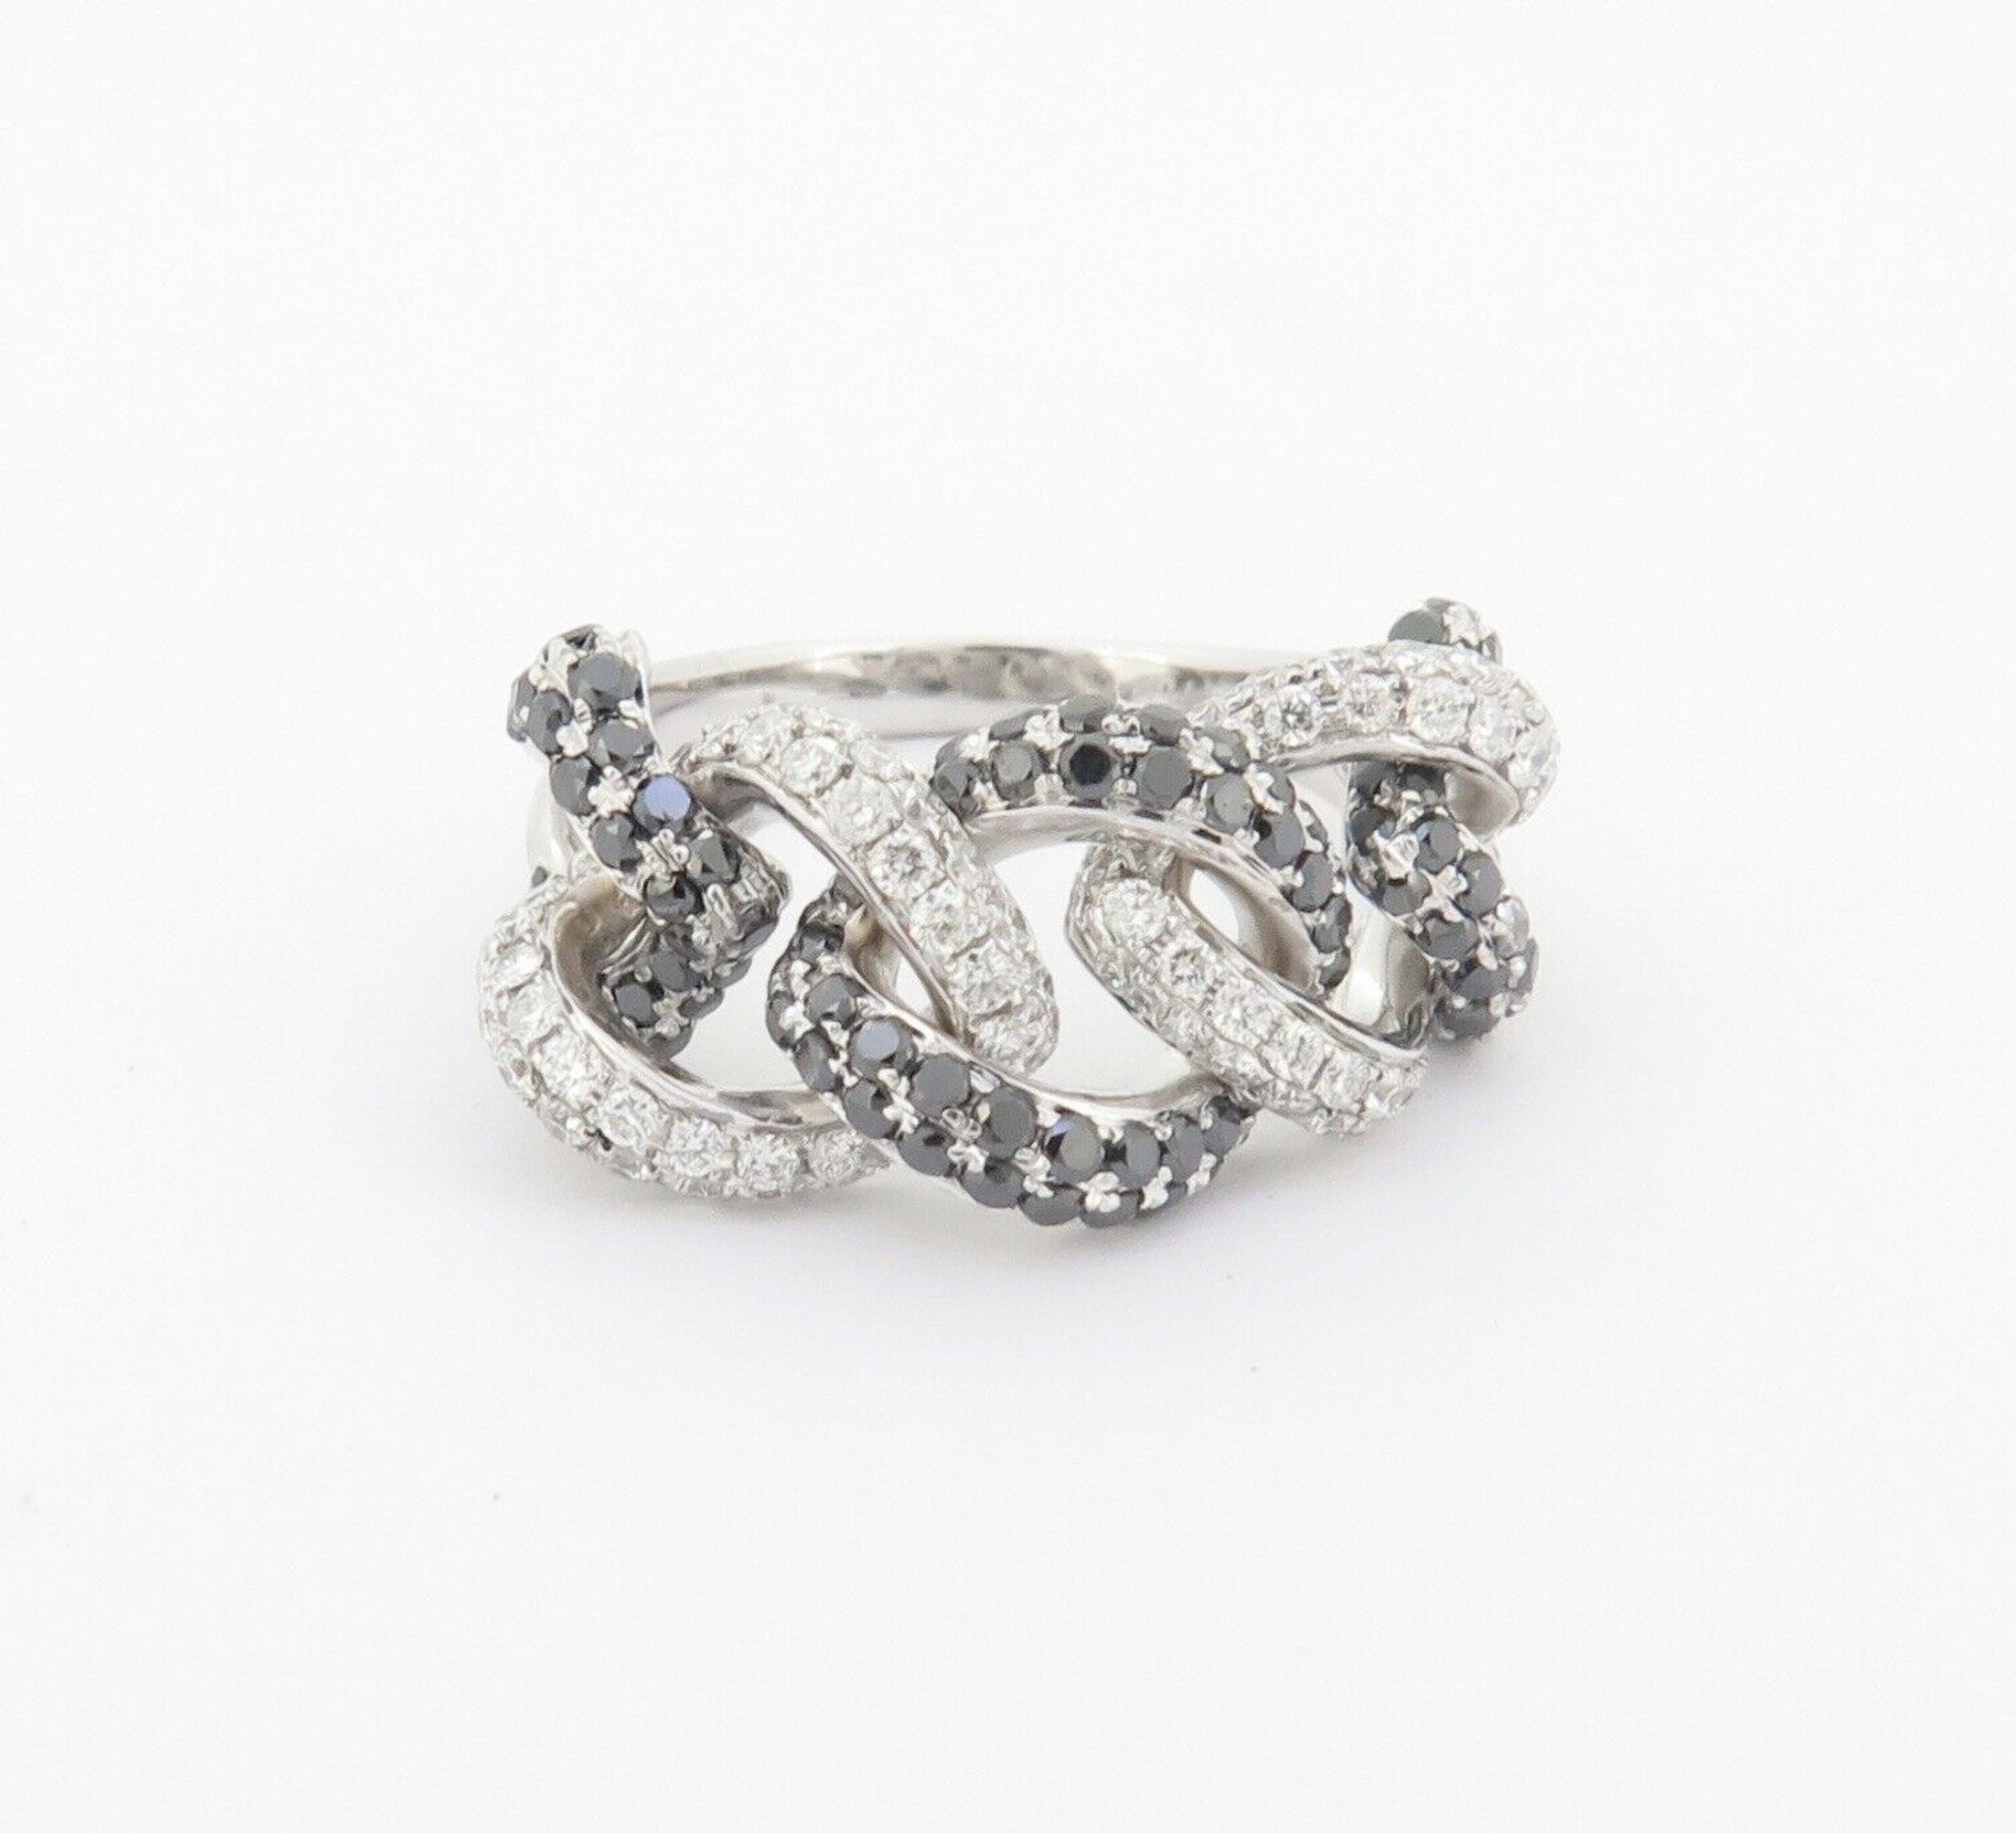 Chain Link Ring - 925 Sterling Silver Pave Band – OBJKTS Jewelry